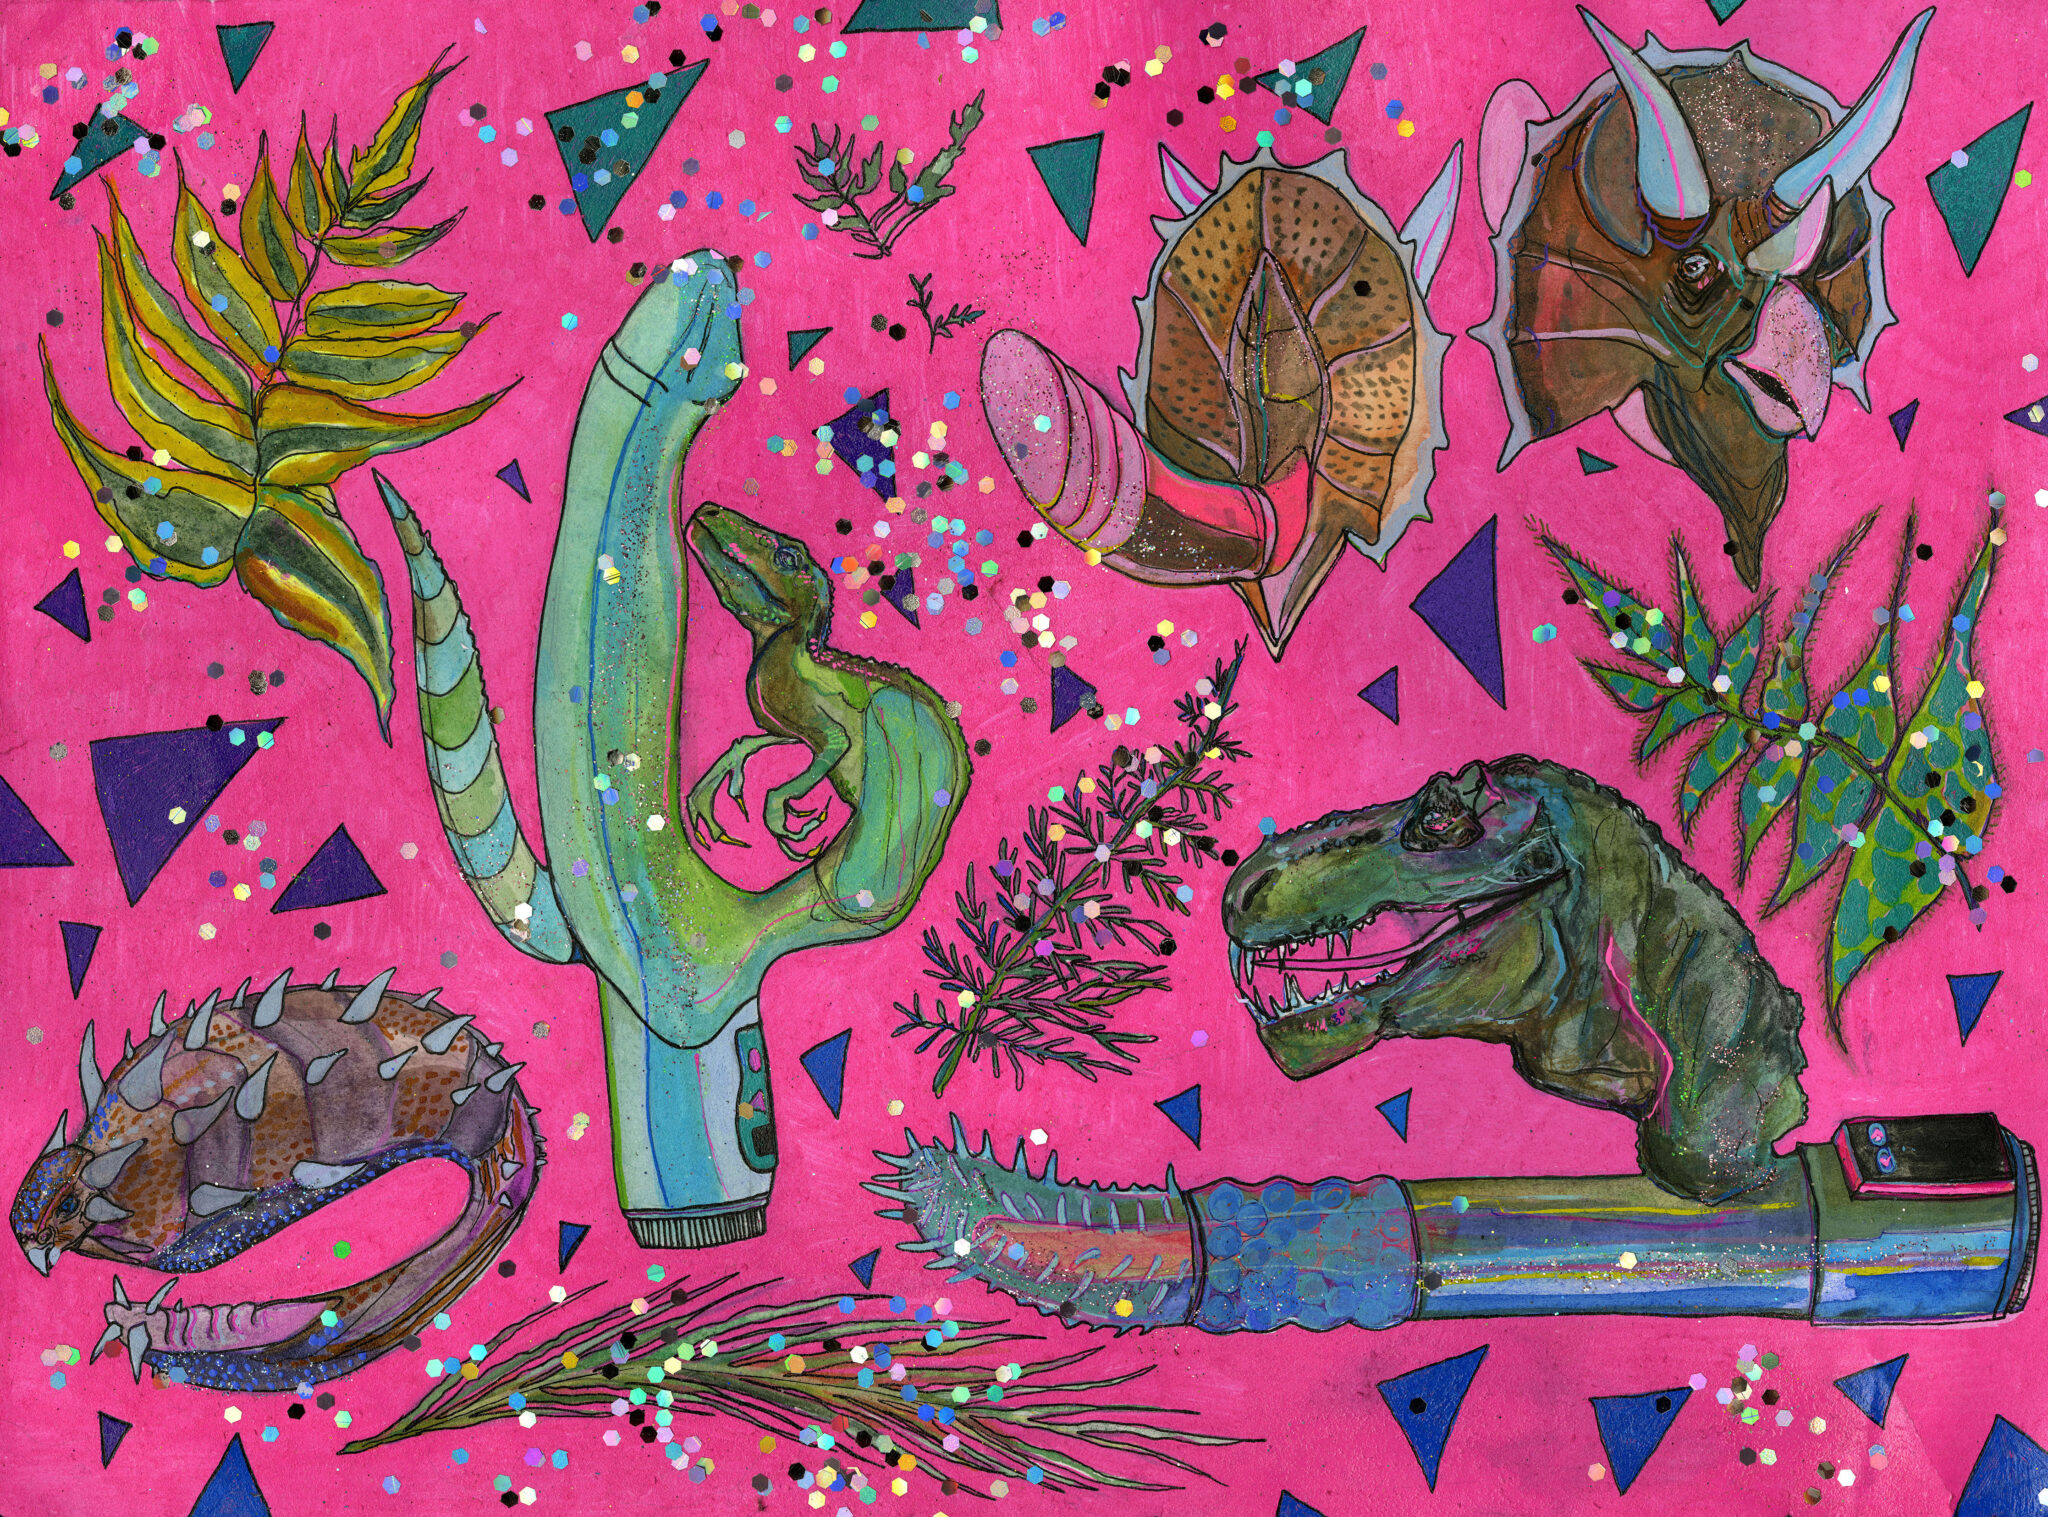 One of Megan Wirick's art pieces featuring vibrator-shaped dinosaurs among leaves and a hot pink background.